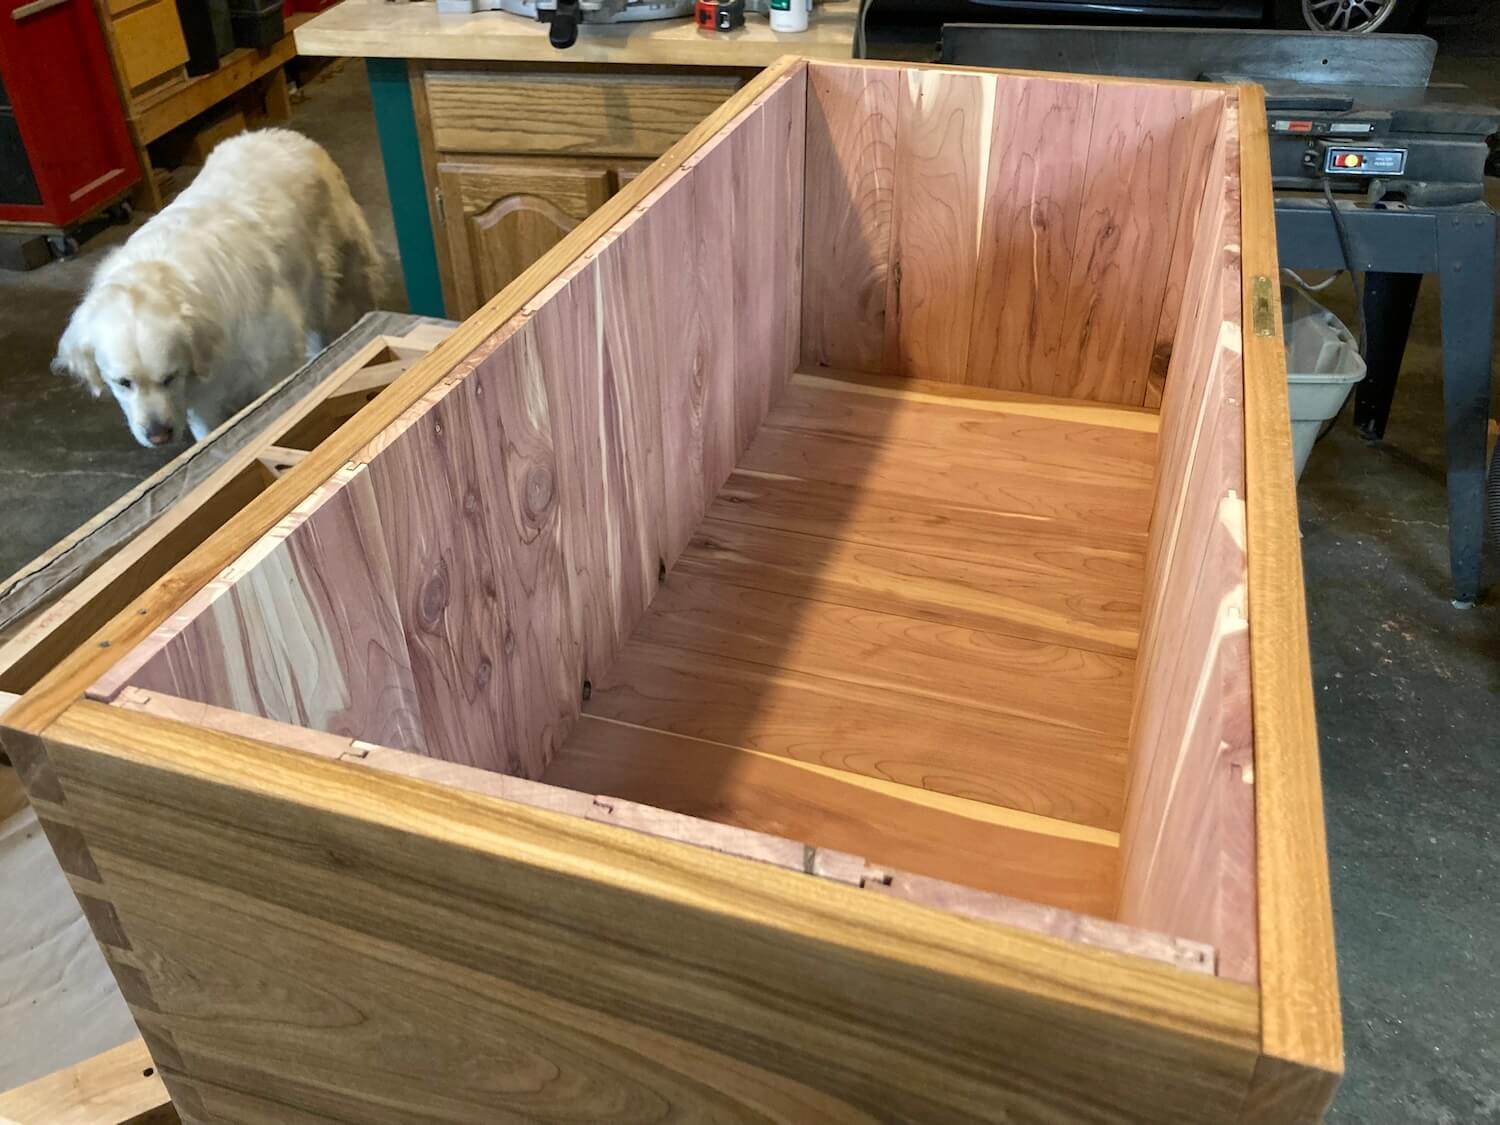 Building a hope chest